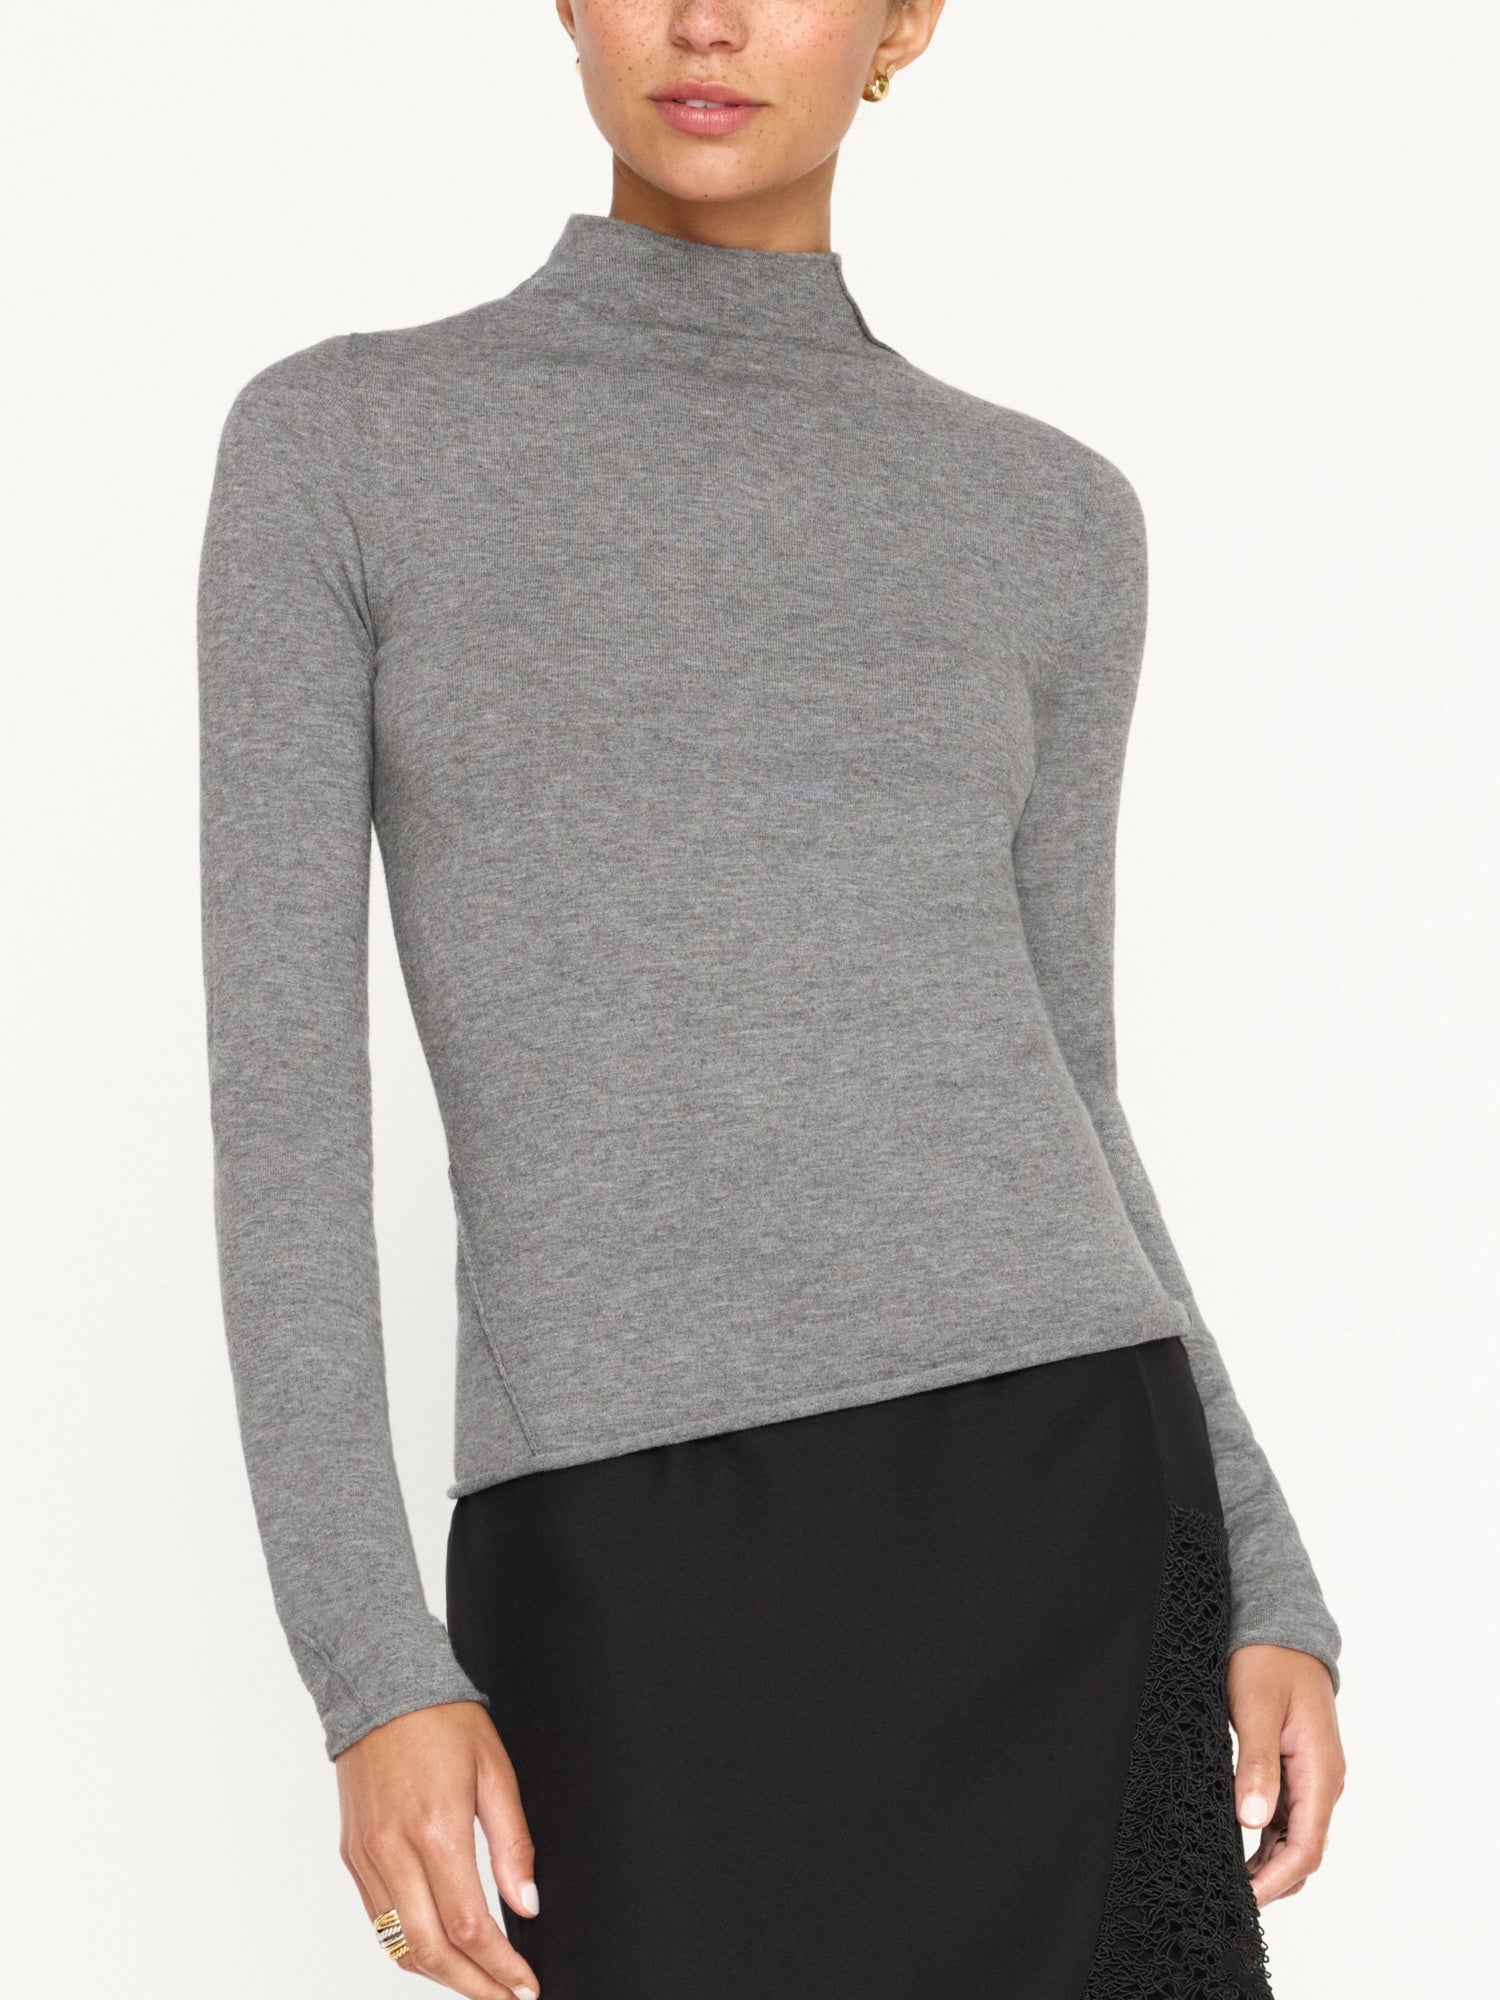 Anika grey mock neck top front view 2